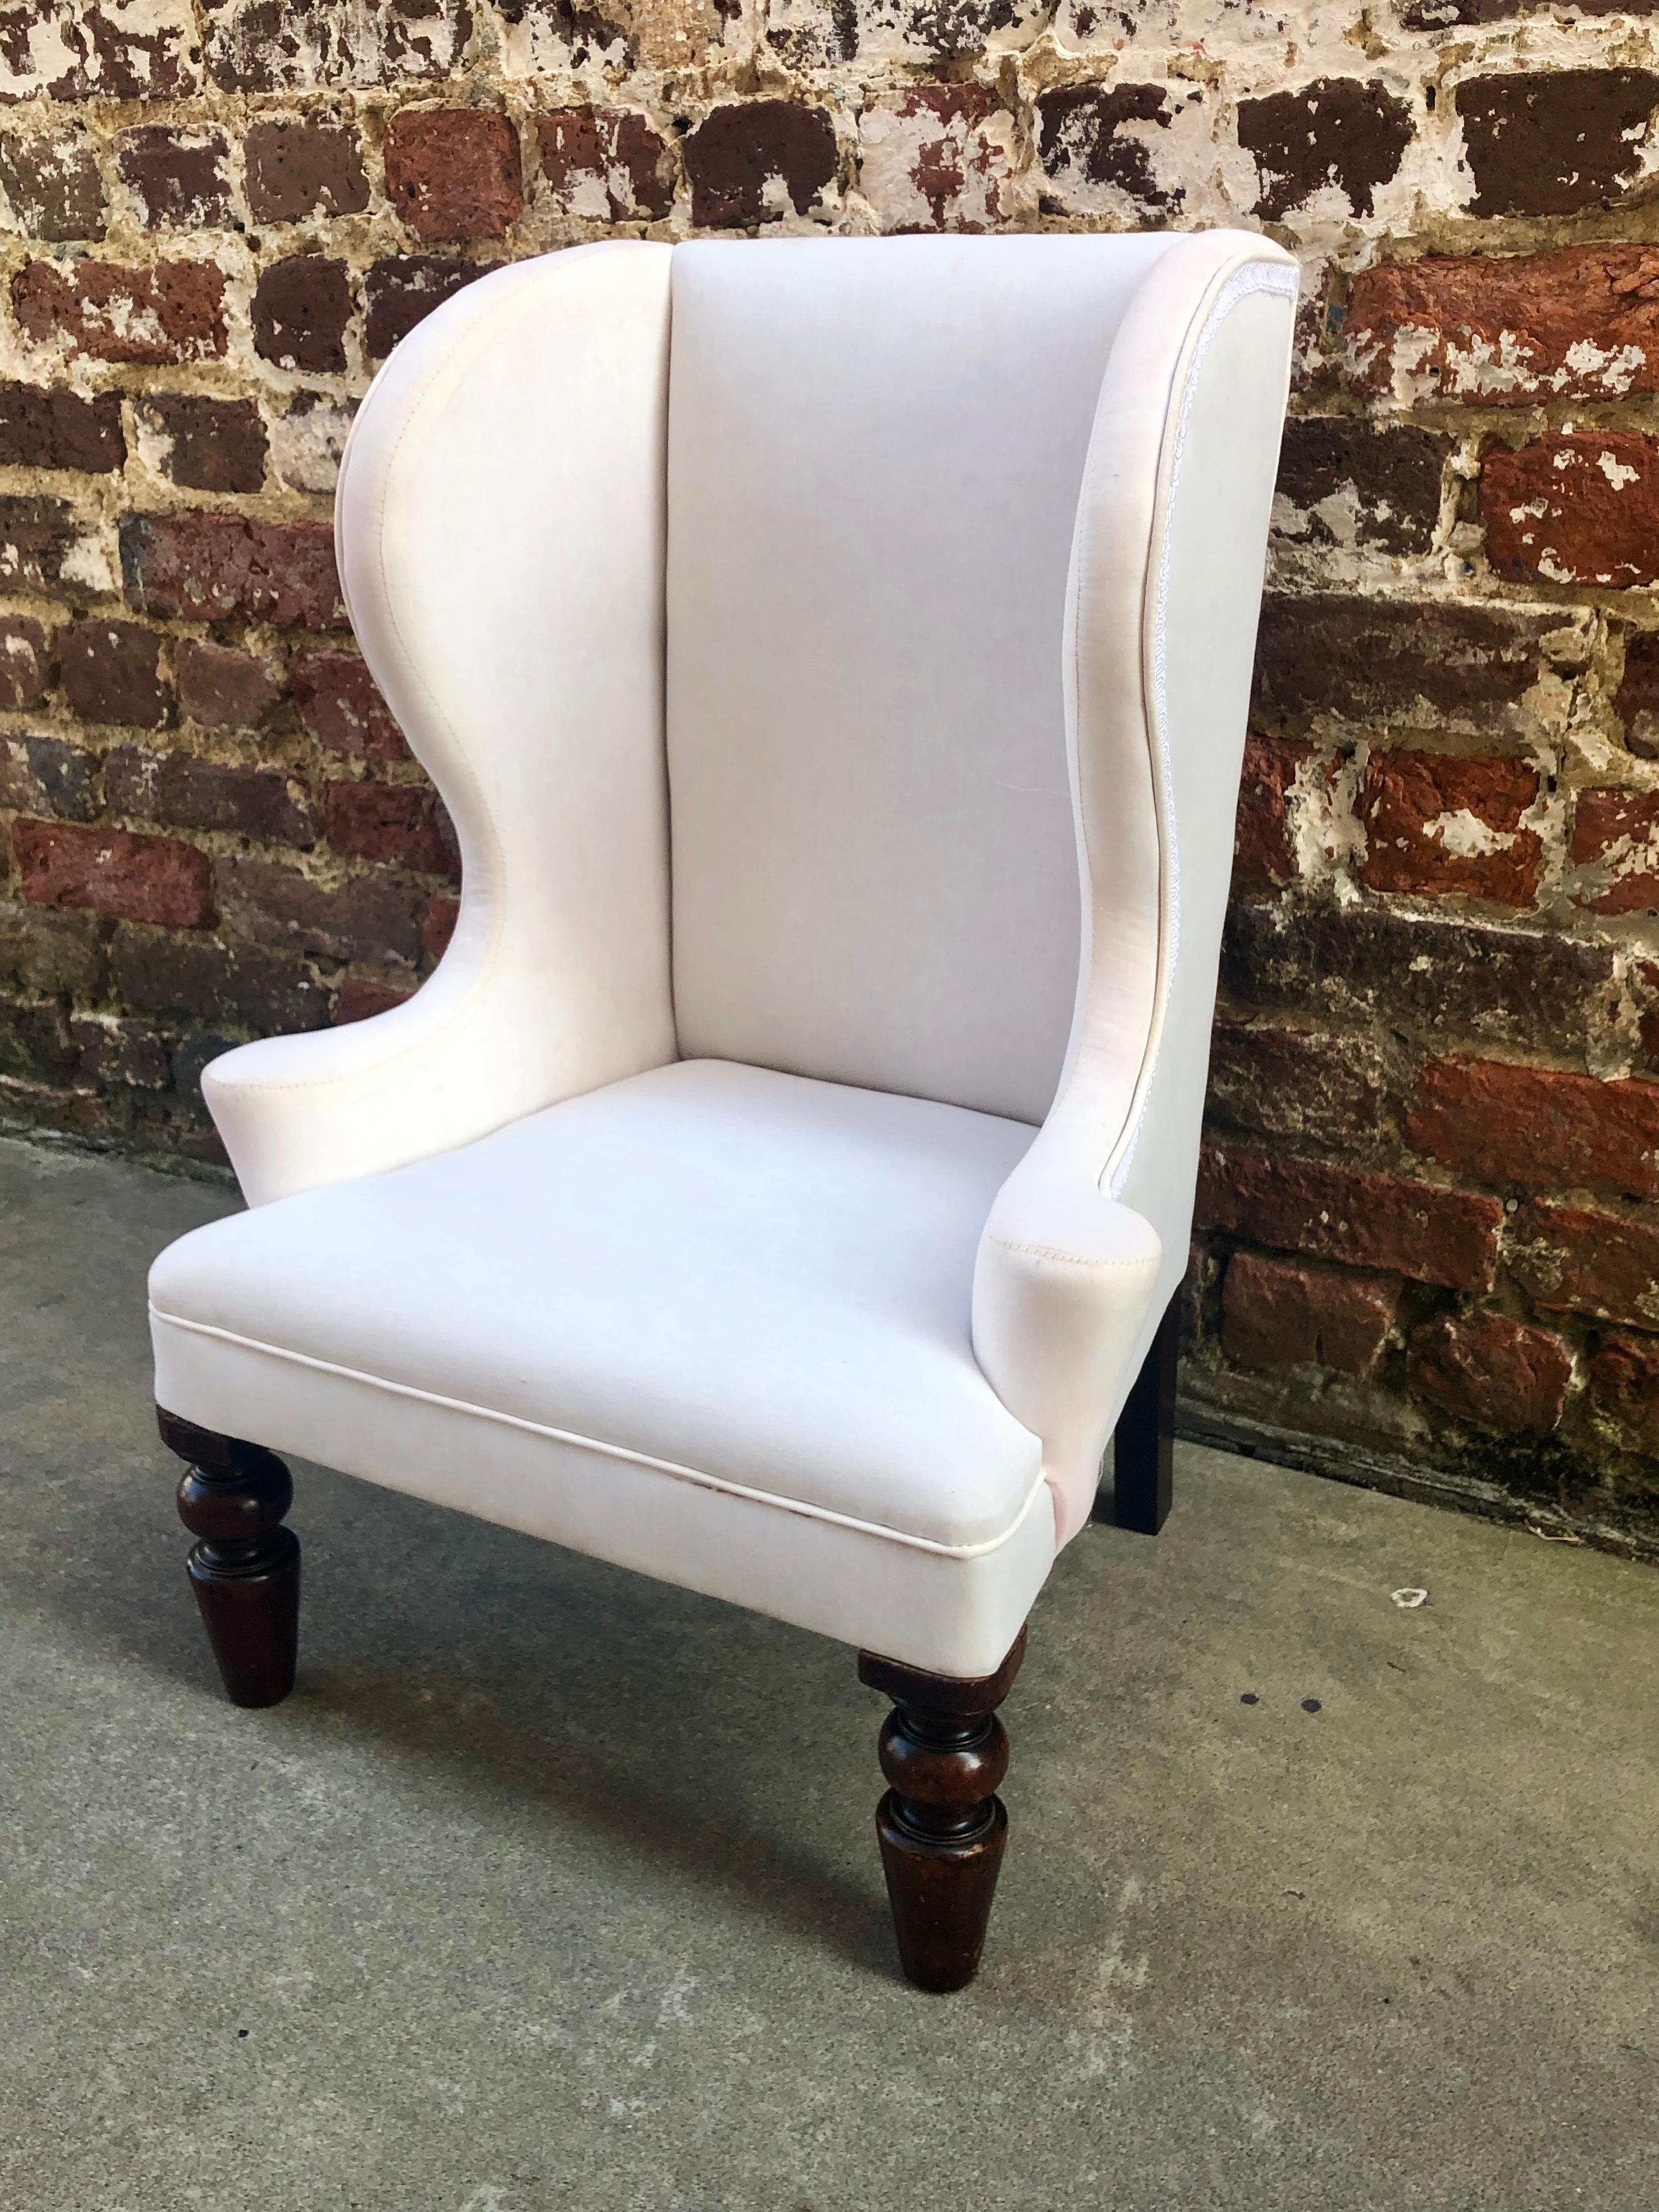 American Child’s Wingback Chair with Scrolled Arms and Mahogany Turned Legs, circa 1840